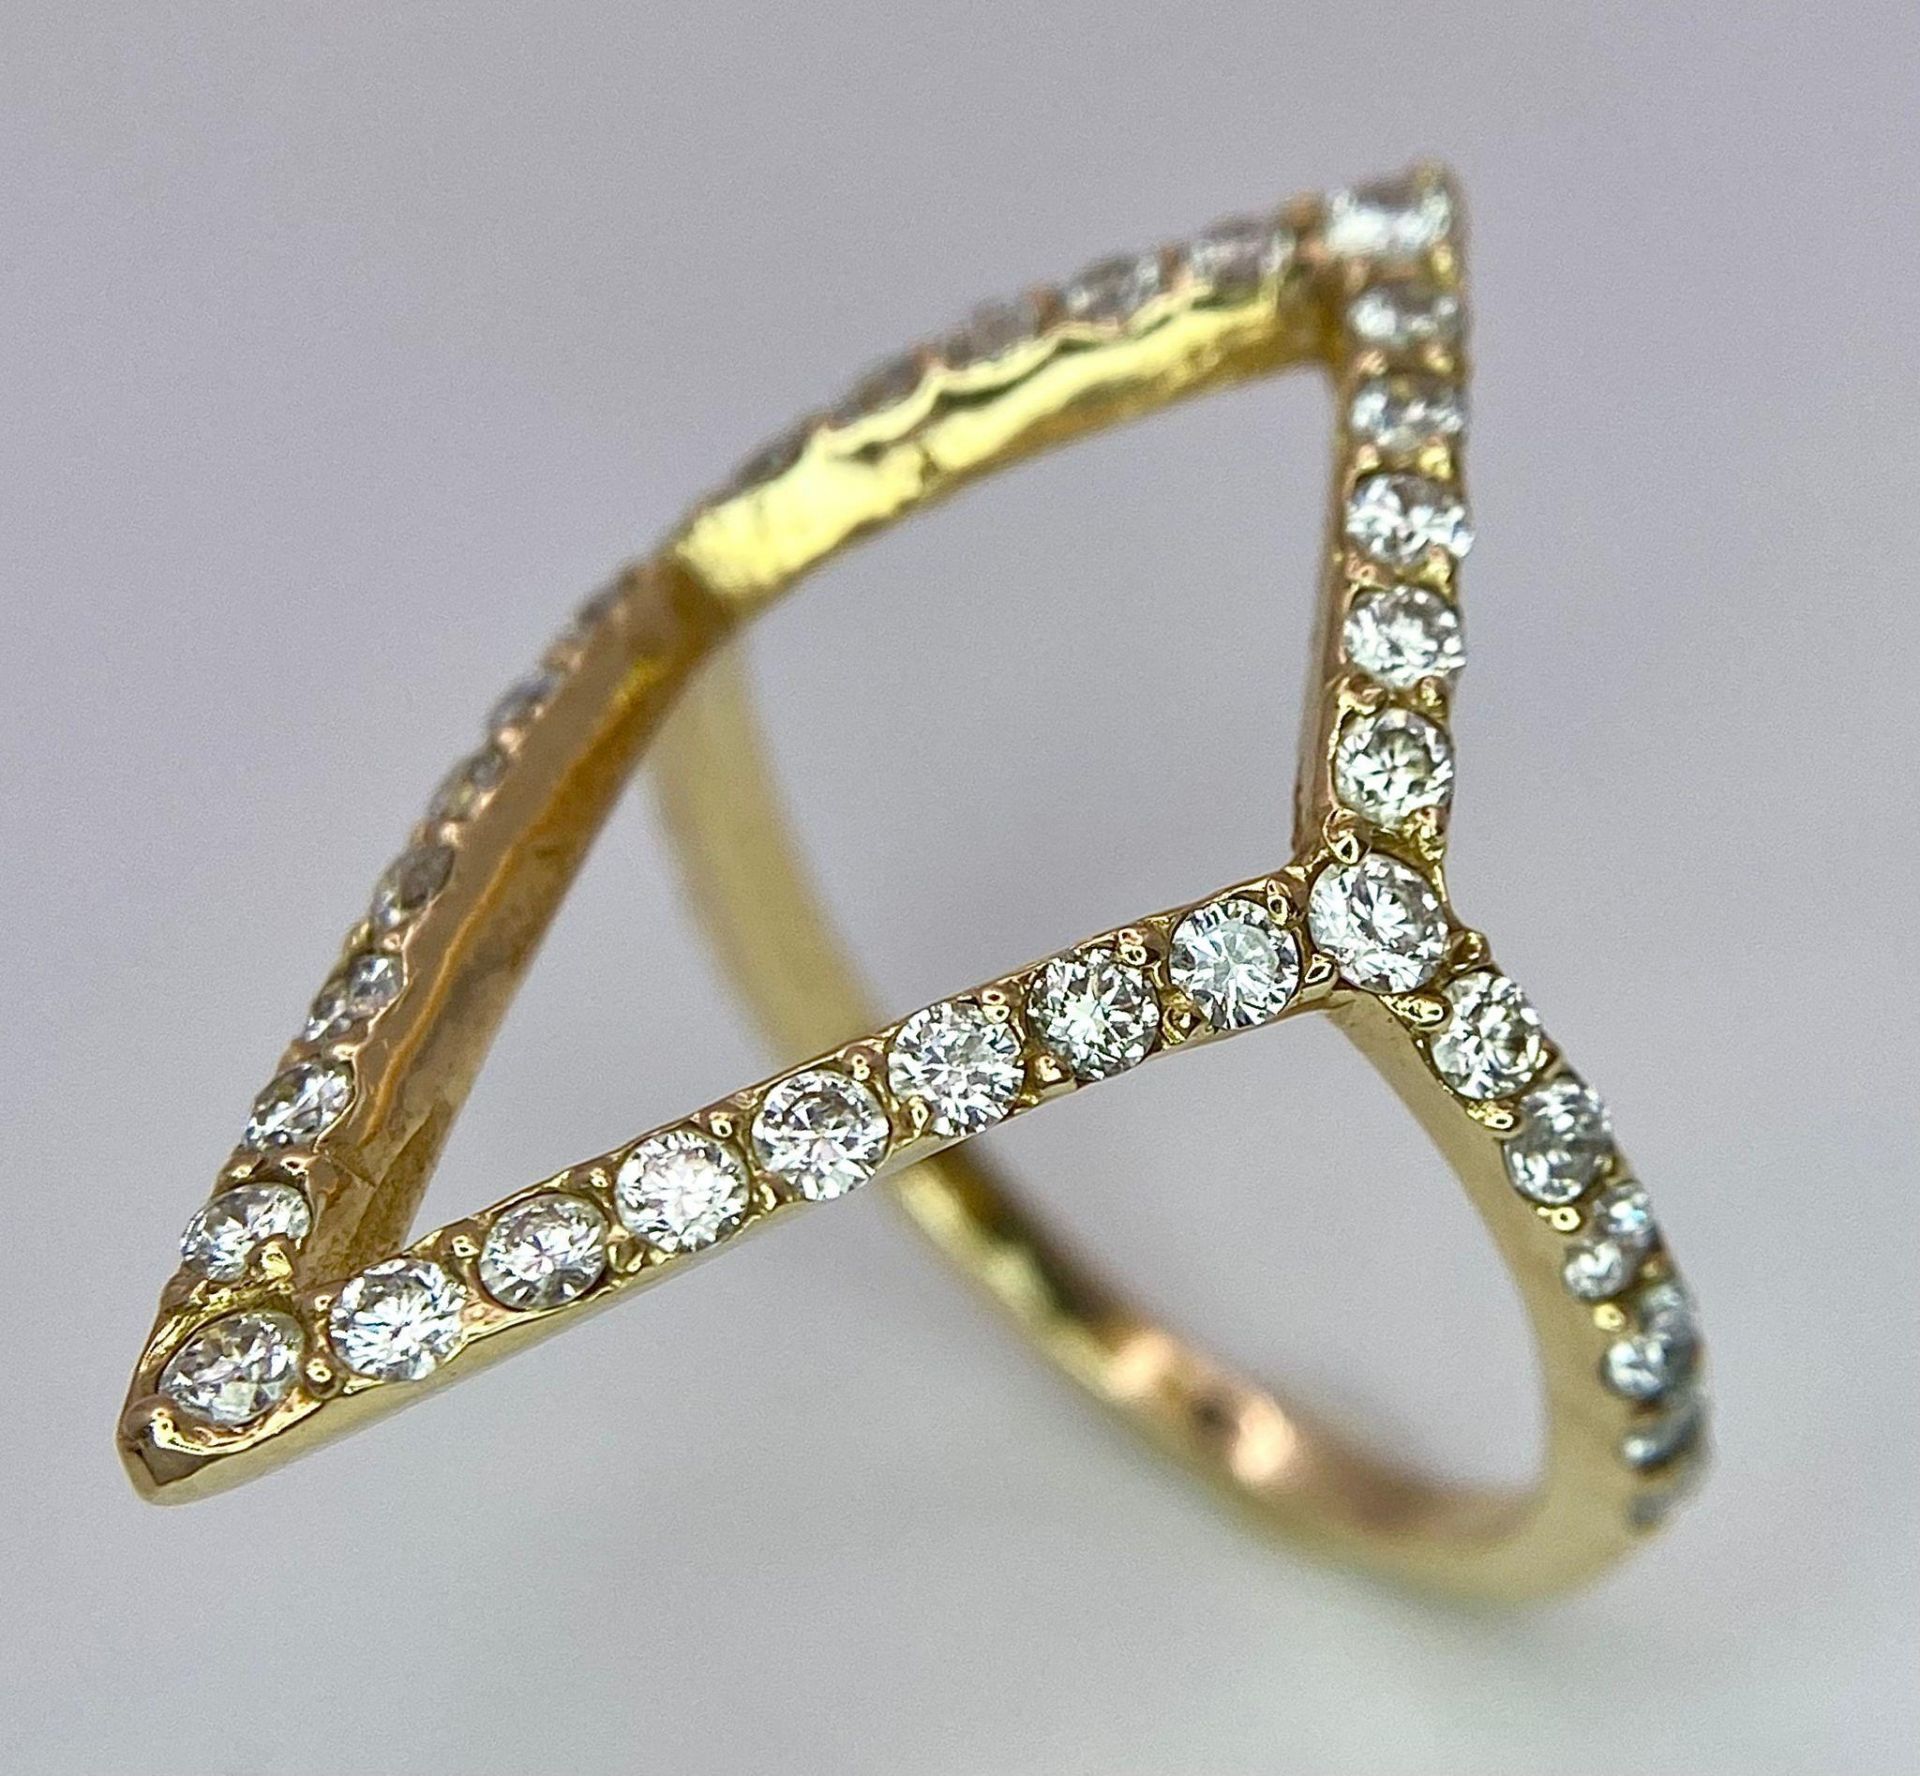 An 18K Yellow Gold (tested) Diamond Trillion Shaped Ring. Size J. 2.6g weight. Ref: 016674 - Image 3 of 4